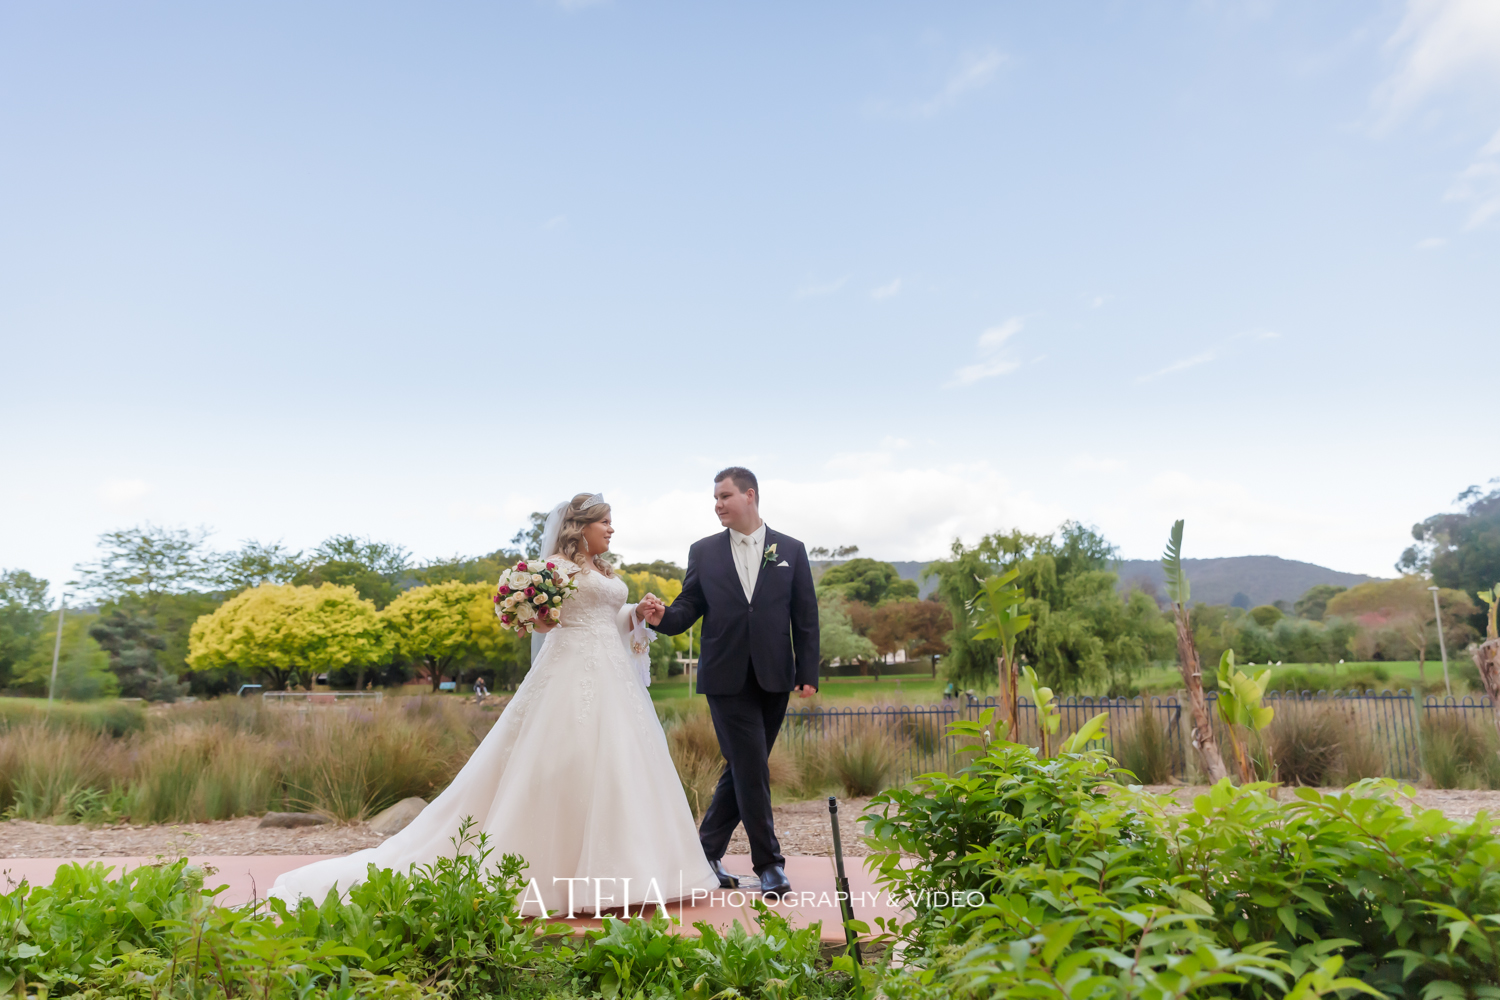 , Mulgrave Country Club Wedding Photography by ATEIA Photography &#038; Video